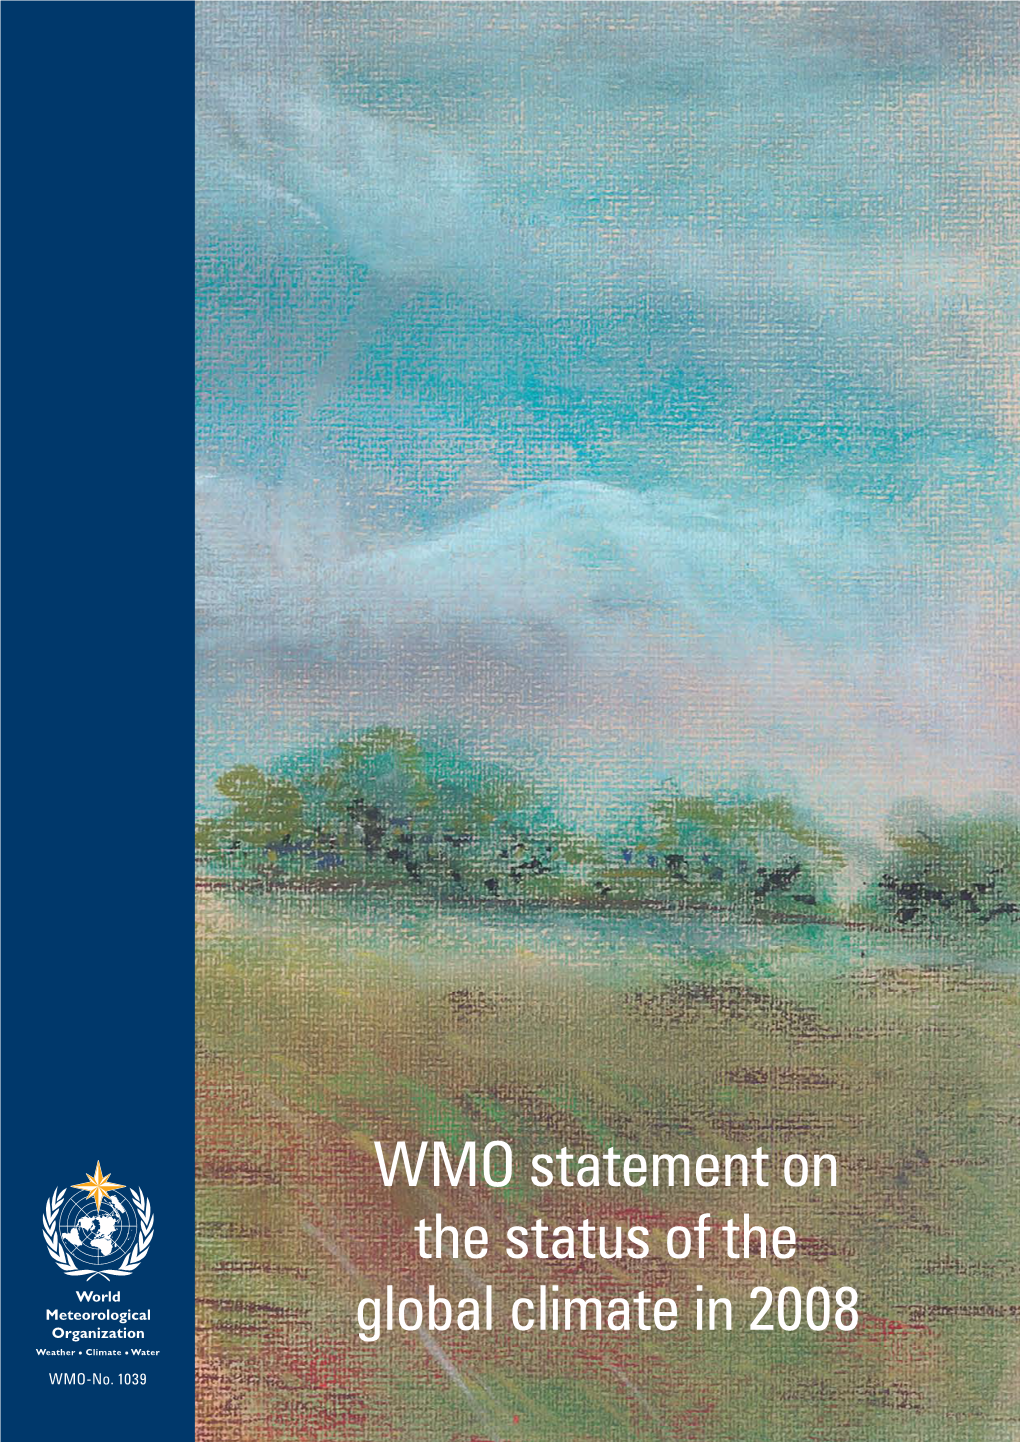 WMO Statement on the Status of the Global Climate in 2008